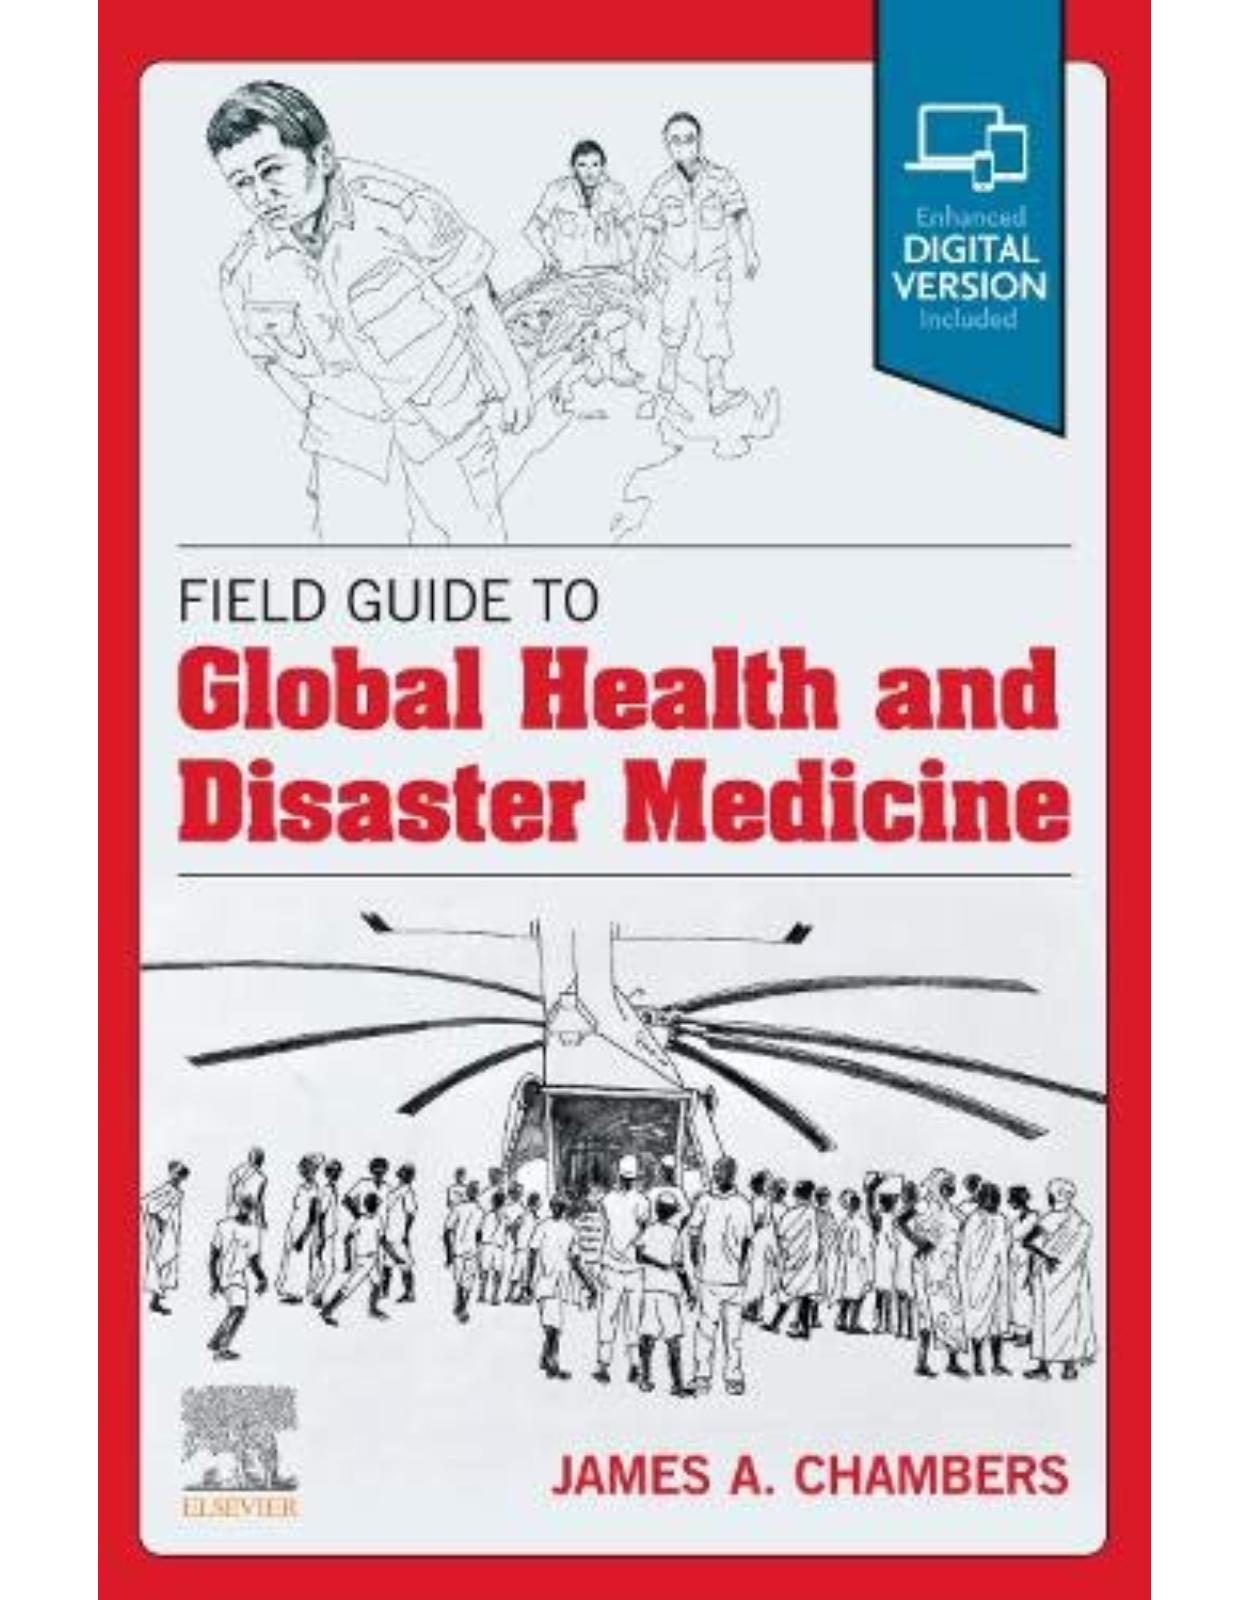 Field Guide to Global Health & Disaster Medicine